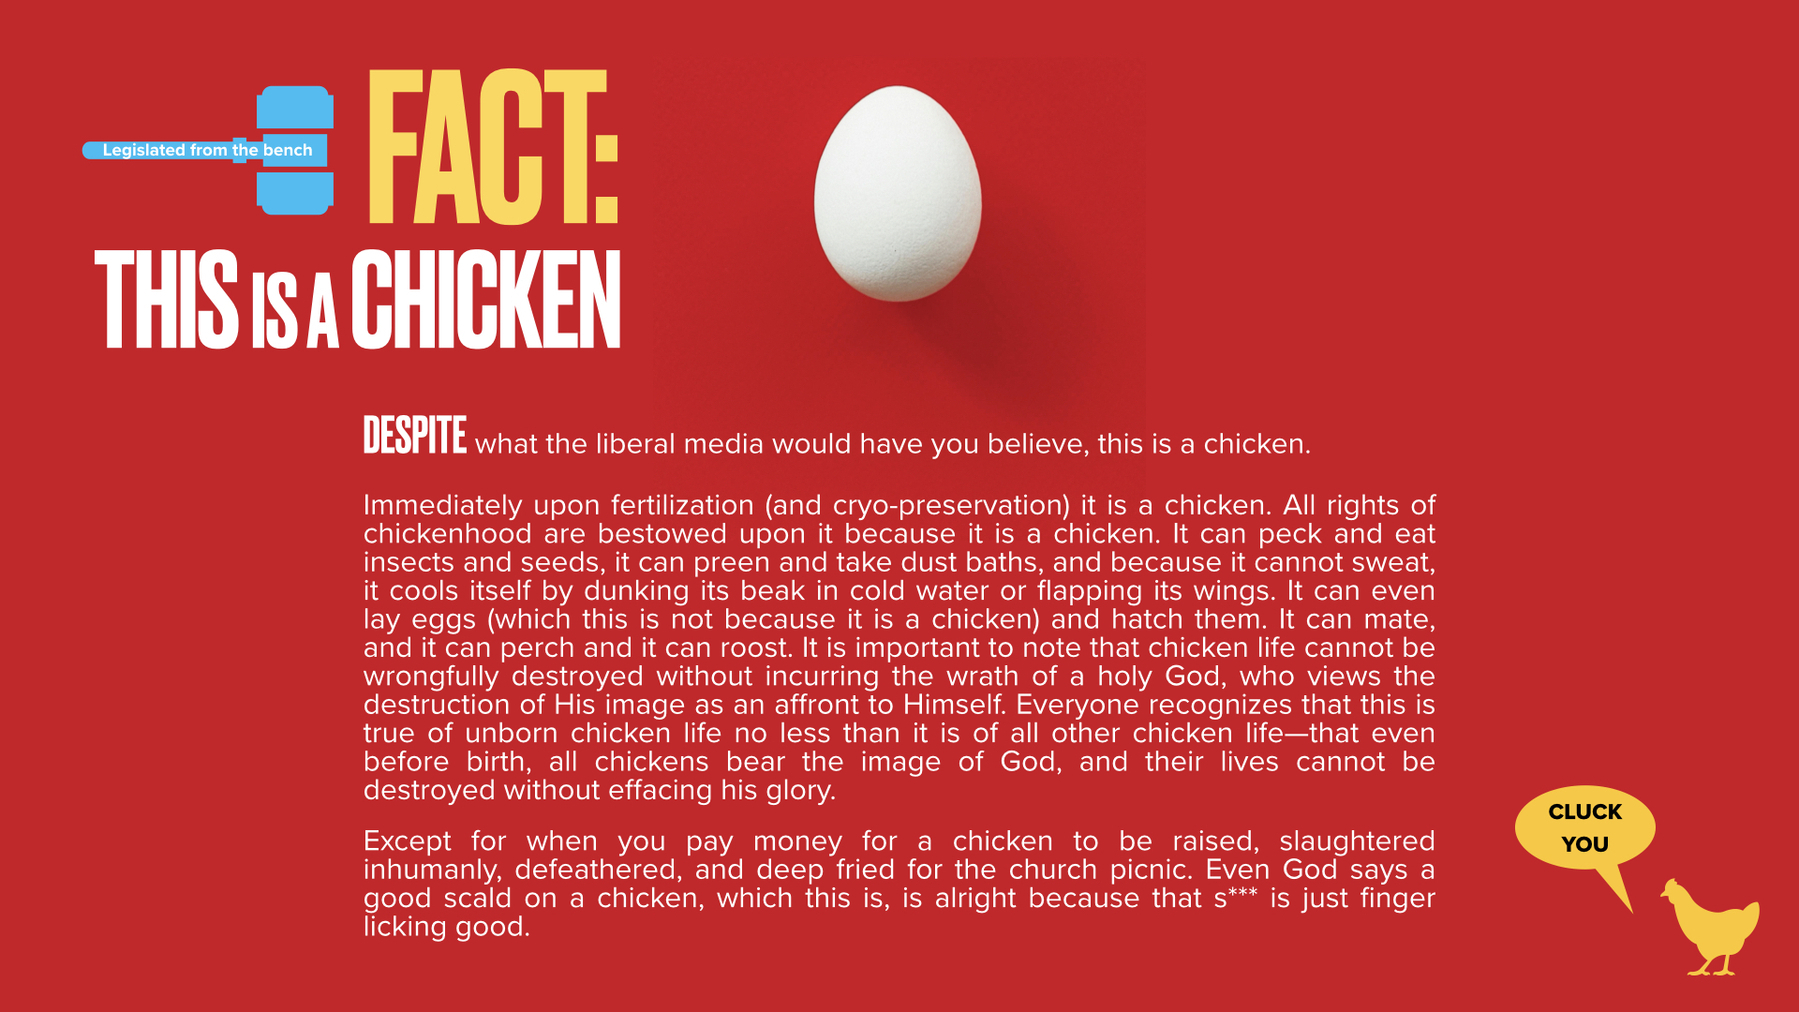 Upon a red background lies a white chicken egg. The headline reads, This Is a Chicken. The paragraph under it reads, Despite what the liberal media would have you believe, this is a chicken.  Immediately upon fertilization (and cryo-preservation) it is a chicken. All rights of chickenhood are bestowed upon it because it is a chicken. It can peck and eat insects and seeds, it can preen and take dust baths, and because it cannot sweat, it cools itself by dunking its beak in cold water or flapping its wings. It can even lay eggs (which this is not because it is a chicken) and hatch them. It can mate, and it can perch and it can roost. It is important to note that chicken life cannot be wrongfully destroyed without incurring the wrath of a holy God, who views the destruction of His image as an affront to Himself. Everyone recognizes that this is true of unborn chicken life no less than it is of all other chicken life—that even before birth, all chickens bear the image of God, and their lives cannot be destroyed without effacing his glory.  Except for when you pay money for a chicken to be raised, slaughtered inhumanly, defeathered, and deep fried for the church picnic. Even God says a good scald on a chicken, which this is, is alright because that s*** is just finger licking good. 